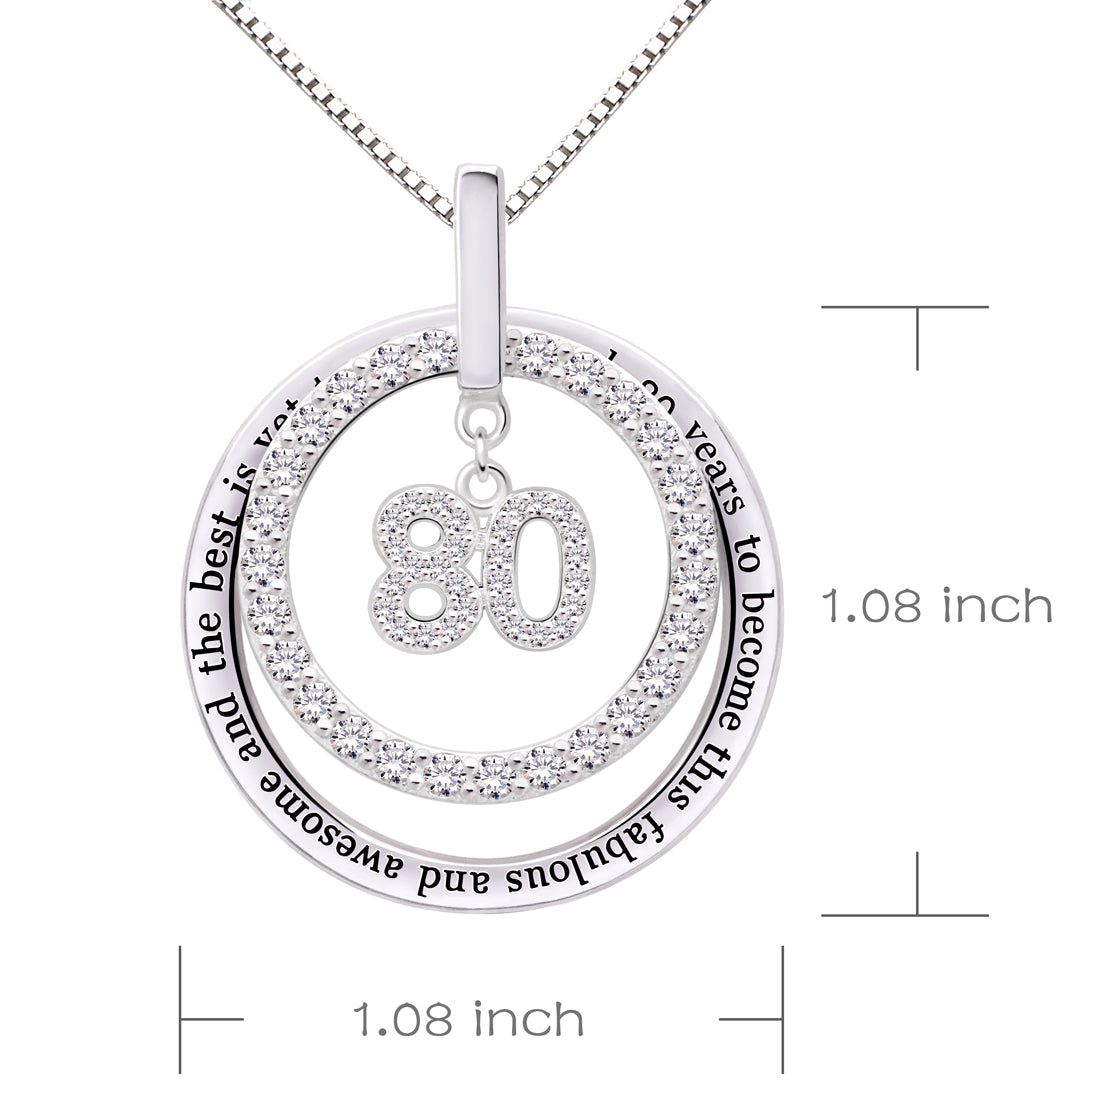 ALOV Jewelry Sterling Silver 80th Birthday It Took 80 Years to Become This Fabulous and Awesome and the Best is Yet to Come Cubic Zirconia Pendant Necklace